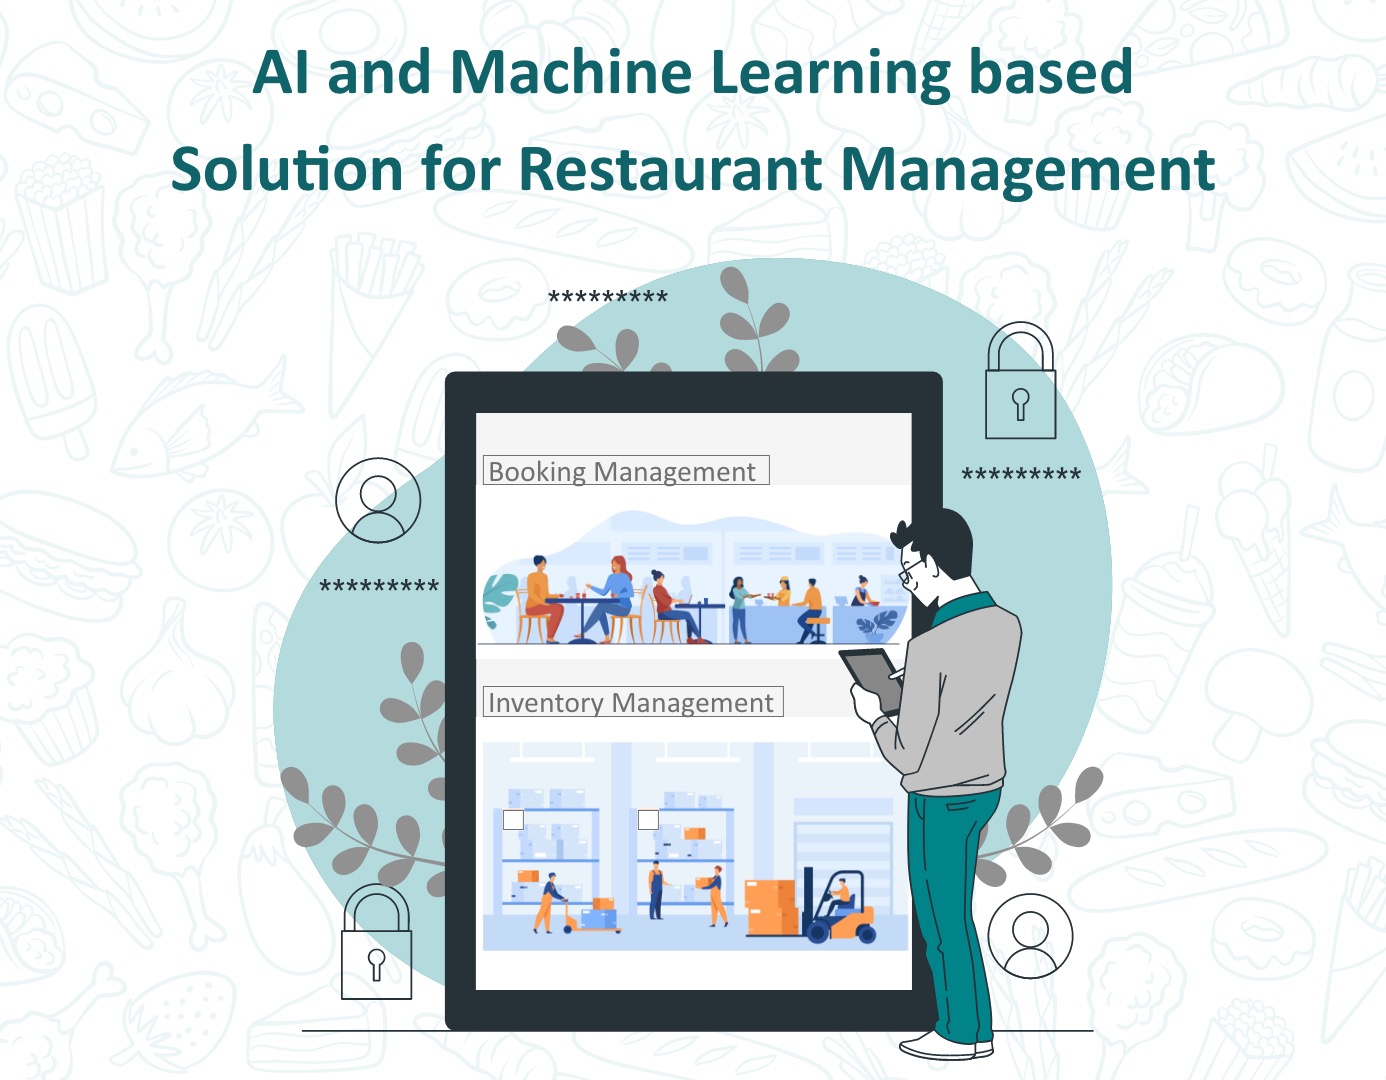 A restaurant scene with AI and machine learning elements, representing an innovative solution for restaurant management